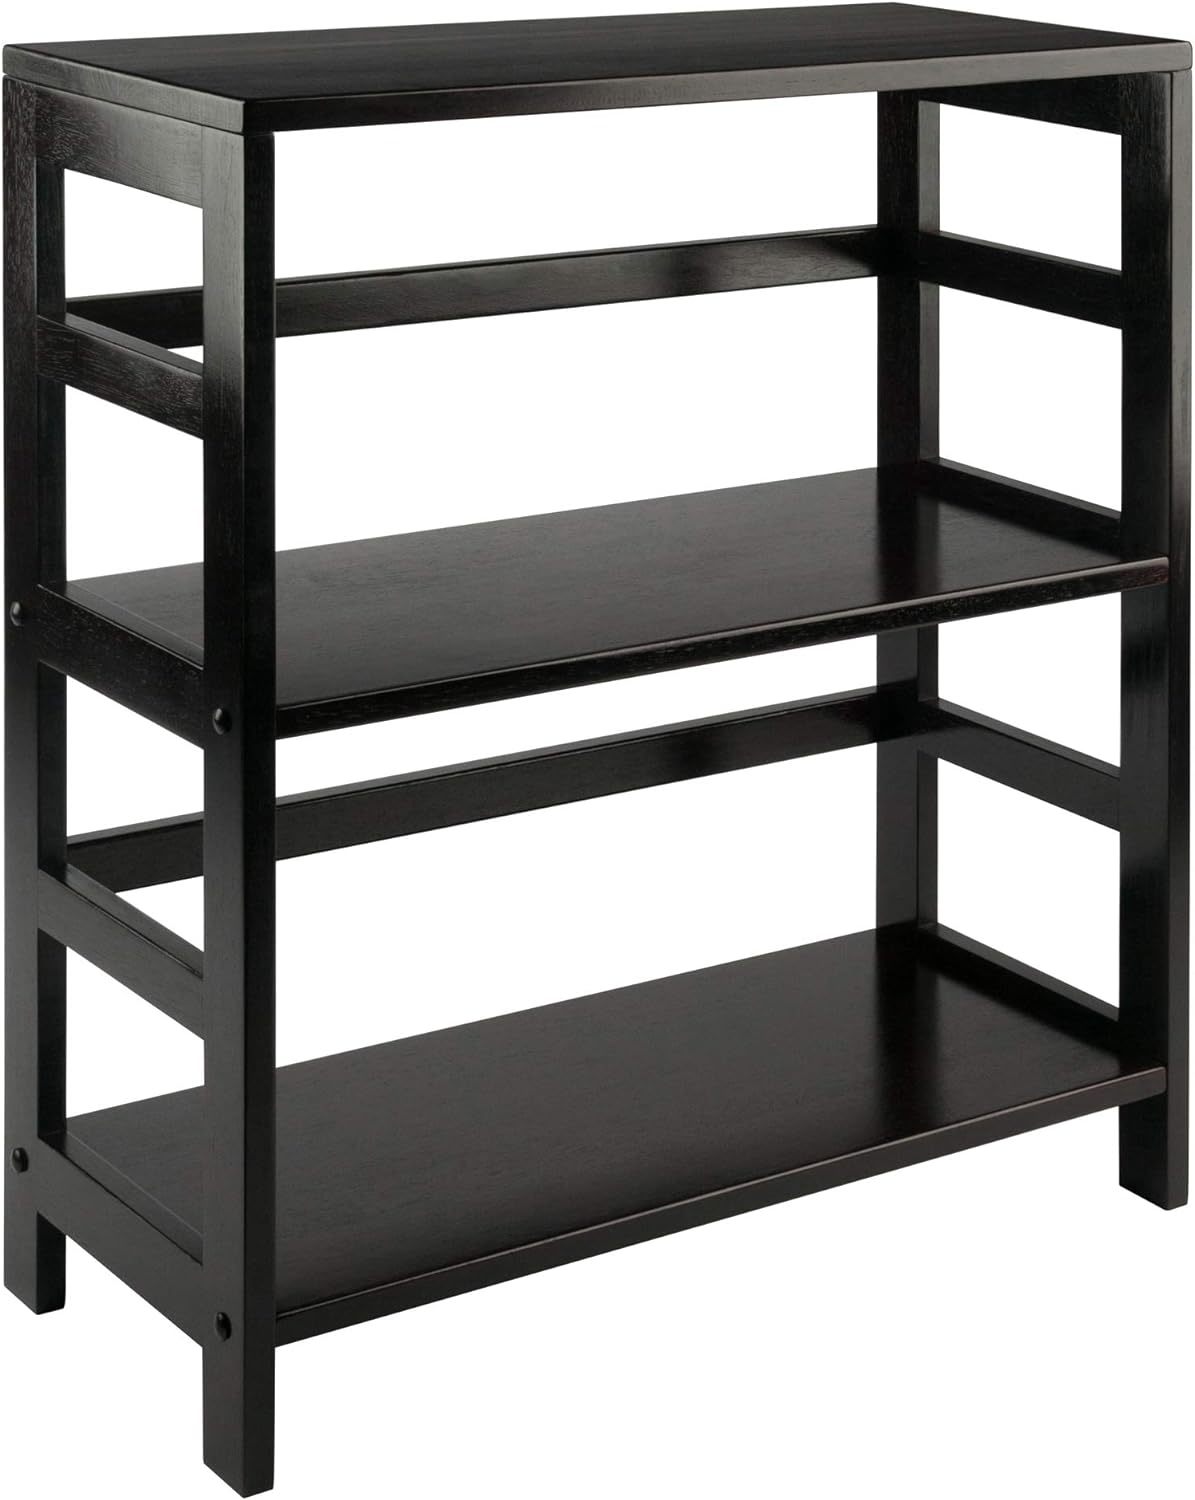 Small And Large Shelves, Espresso, Winsome Wood Leo Model. - $65.95